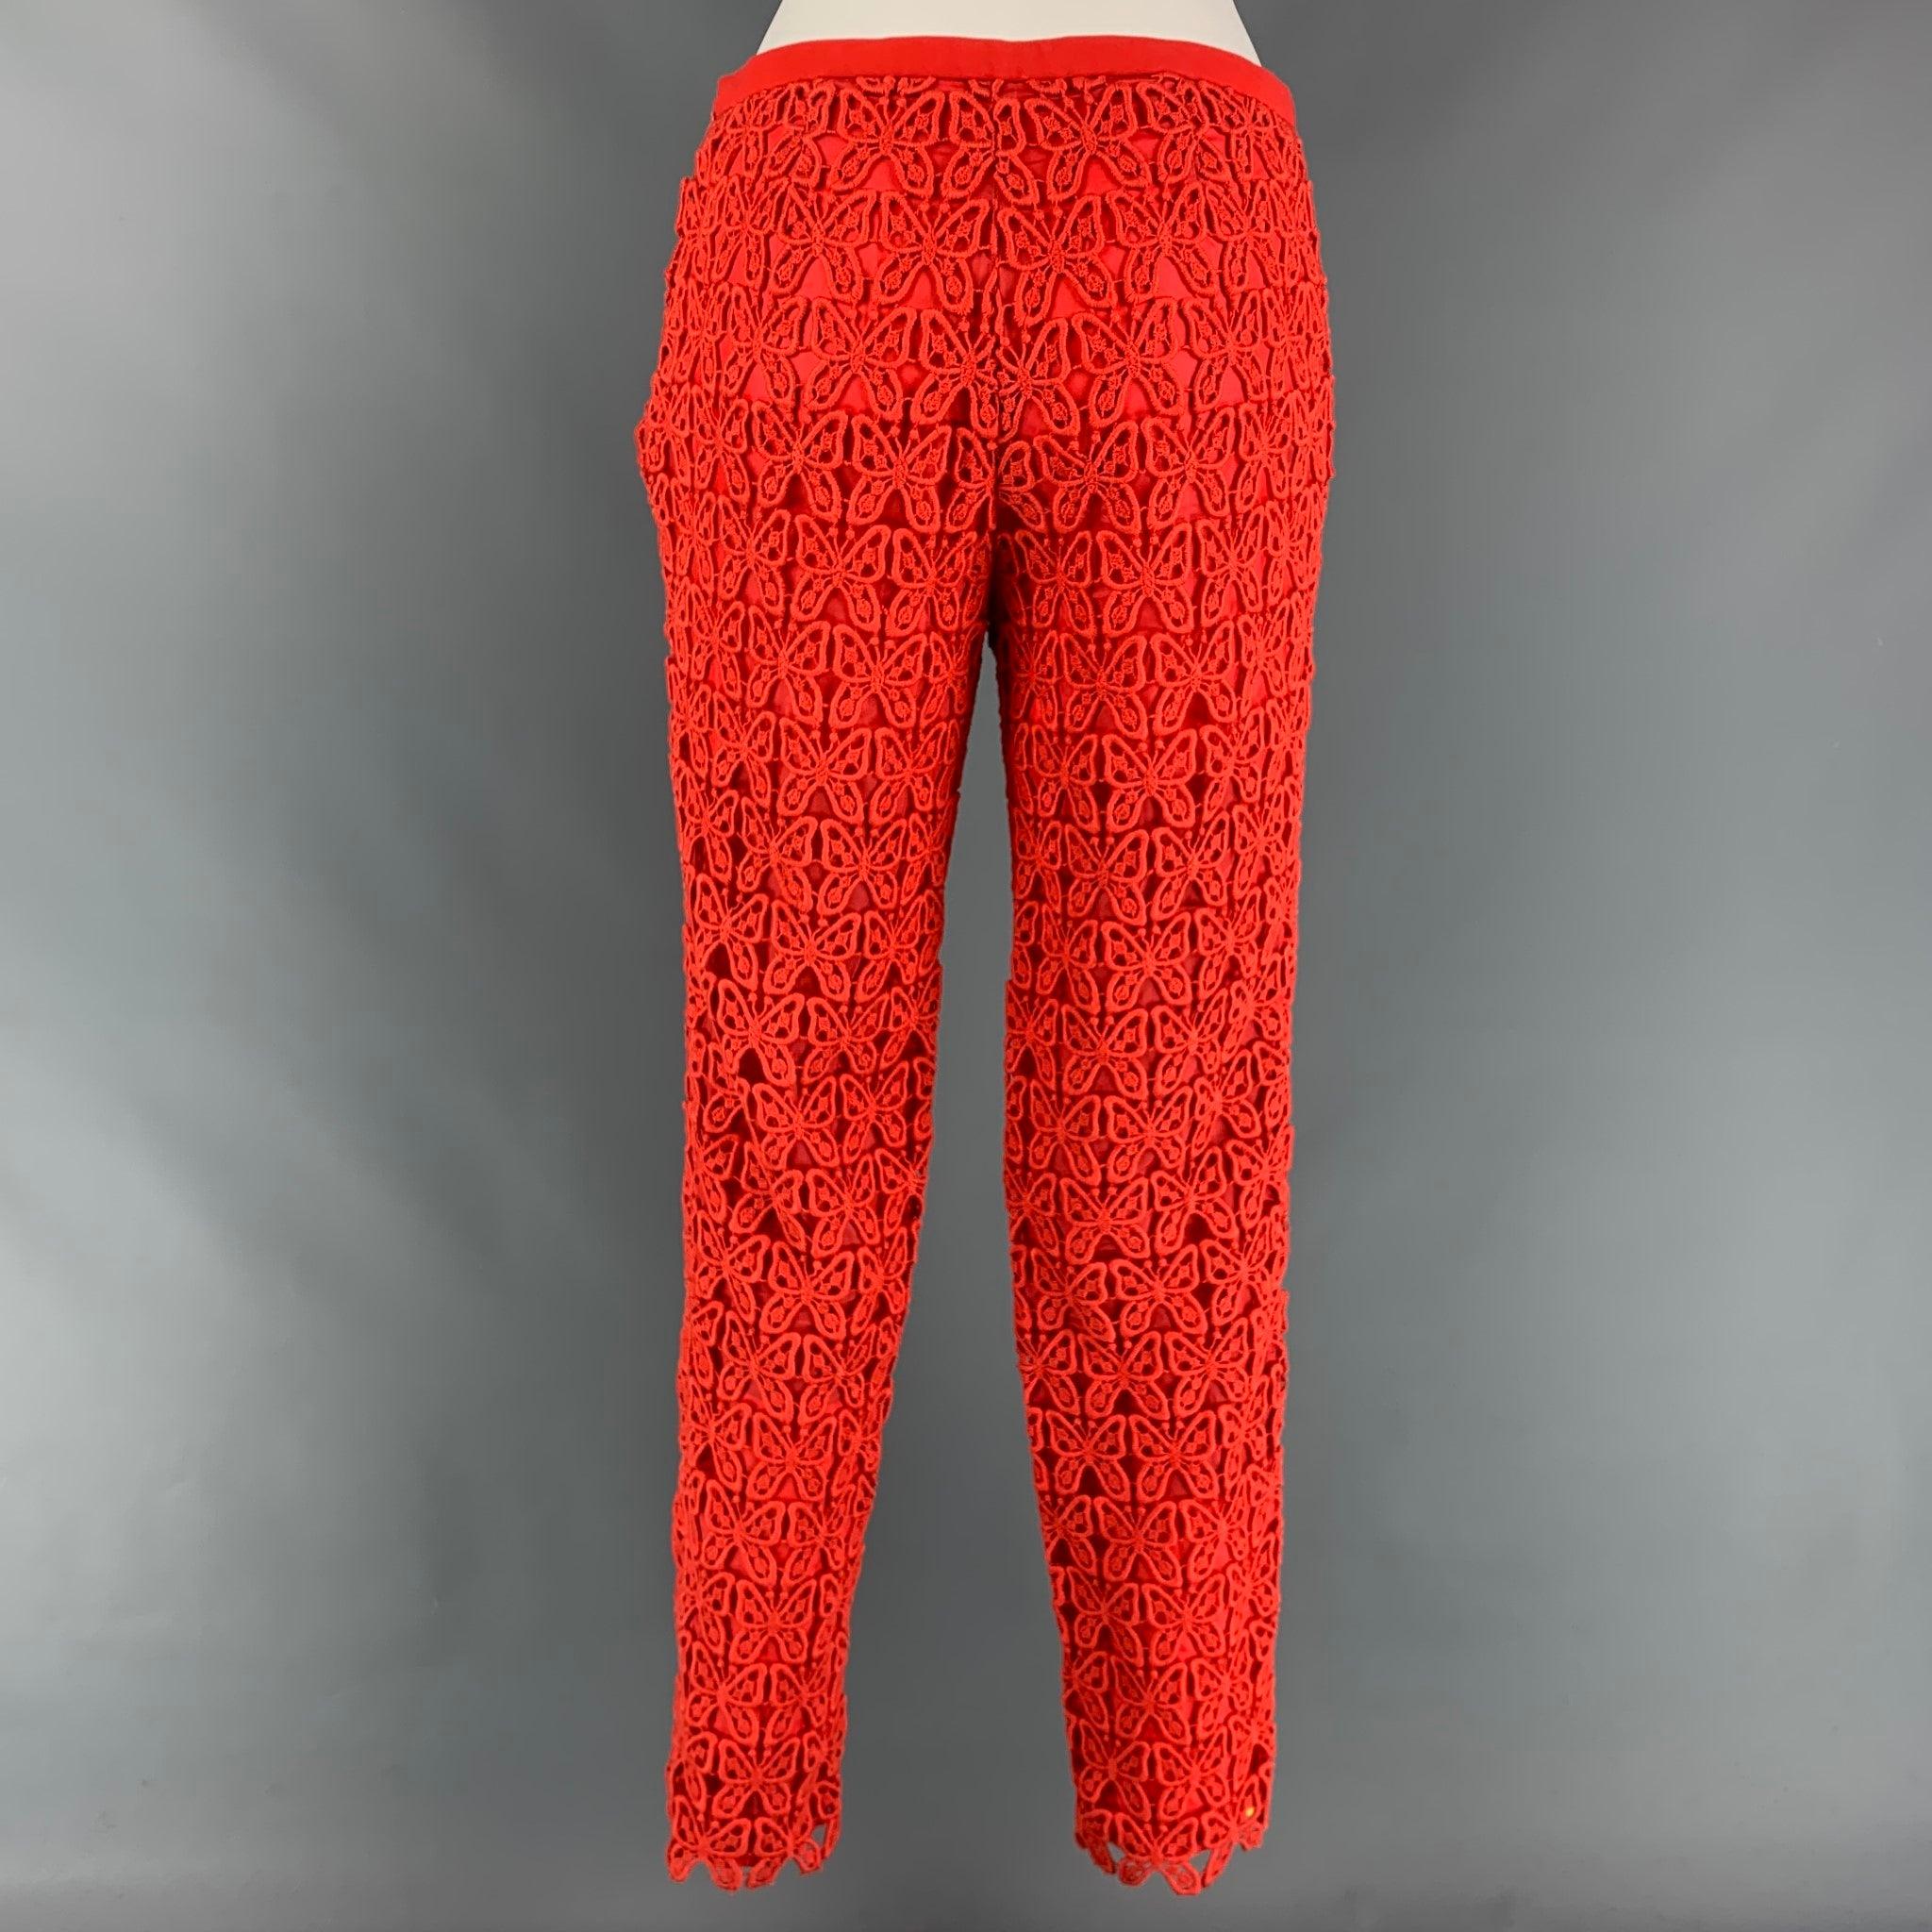 CHEAP AND CHIC by MOSCHINO dress pants comes in a coral triacetate blend featuring a double layer, slim fit, and a side zipper closure.
New With Tags.
 

Marked:   I 40 / D 36 / F 36 / GB 8 / USA 6 

Measurements: 
  Waist: 30 inches  Rise: 9.5